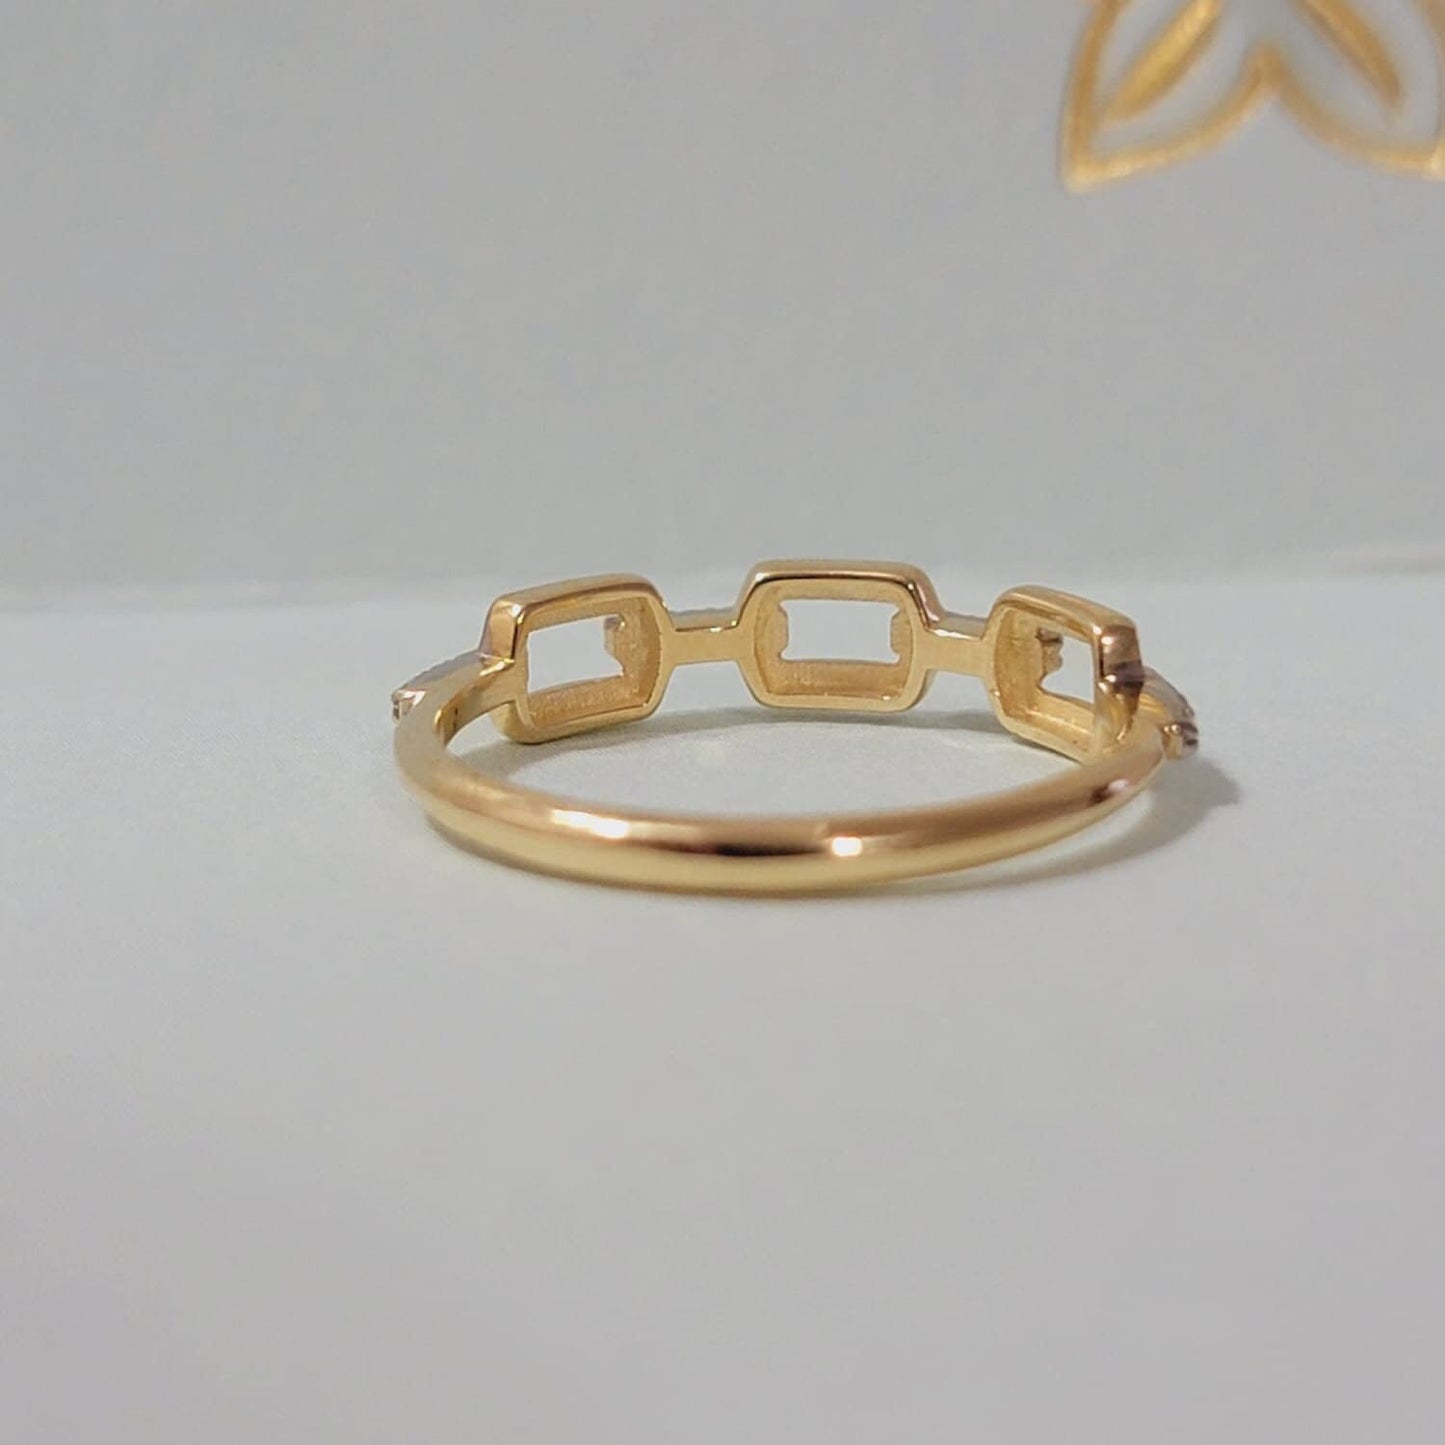 Diamond Chain Link Ring, Diamond Pavé Cuban Curb Link Ring, Gold Linked Ring in14k, Statement Ring, Unique Diamond Ring, Half Eternity Ring